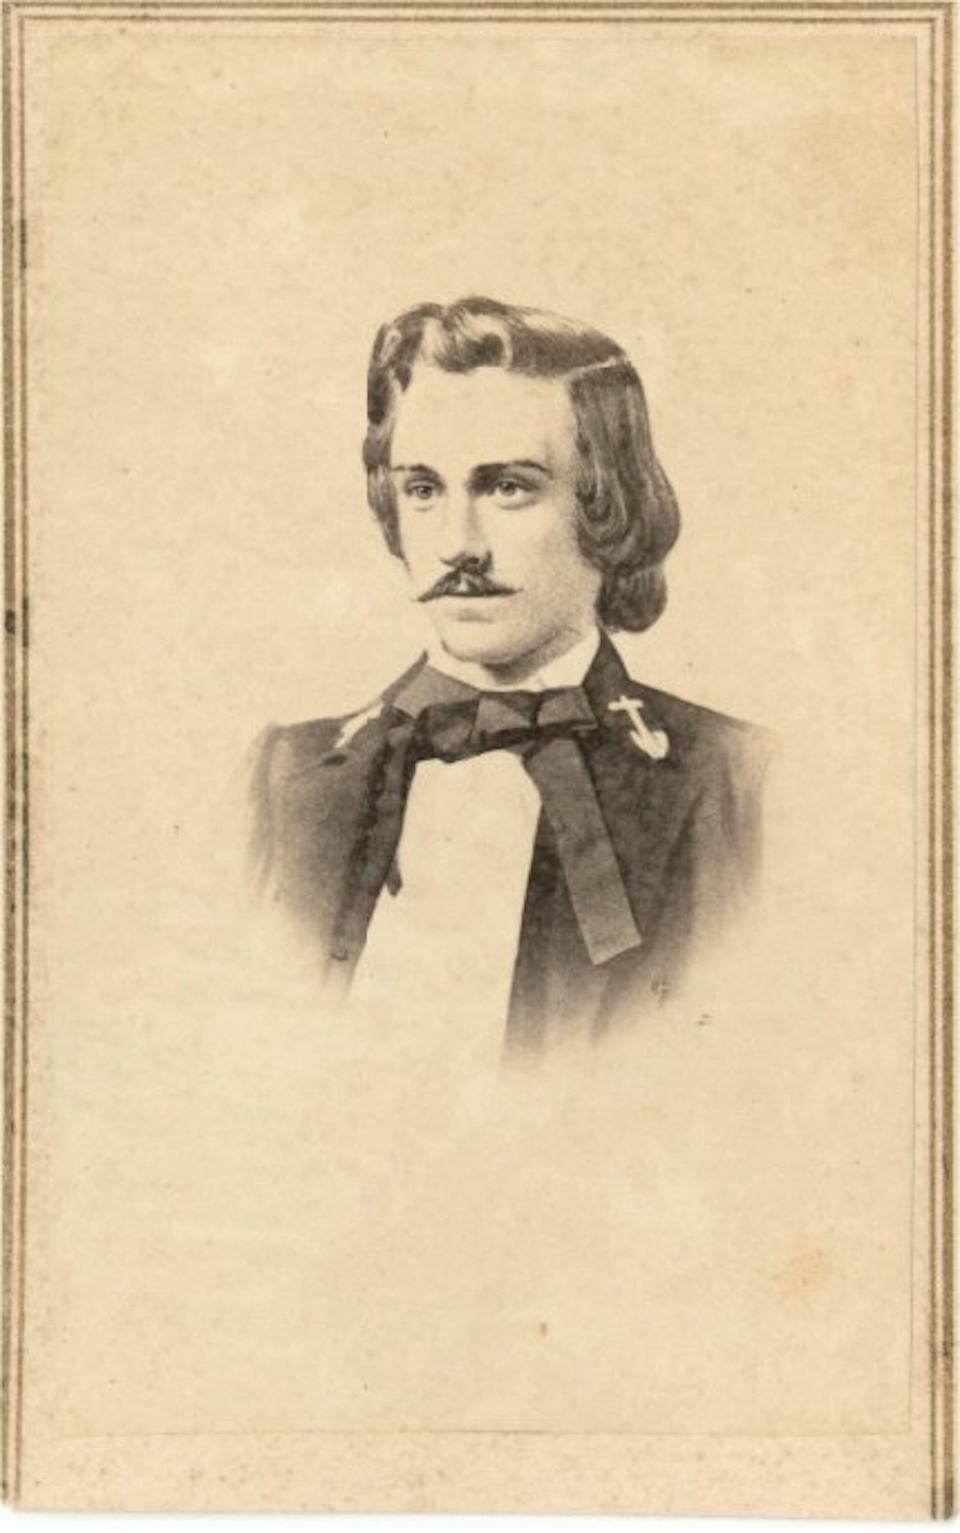 Lt. Charles W. Read, pictured in 1860 while still in the Union Navy. According to a classmate at the Naval Academy “… he racked up a prodigious number of demerits for fighting, profanity, failure to pass room inspection, and other infractions. His lack of discipline and his single-minded self-assurance came close to ending his naval career before it began.”